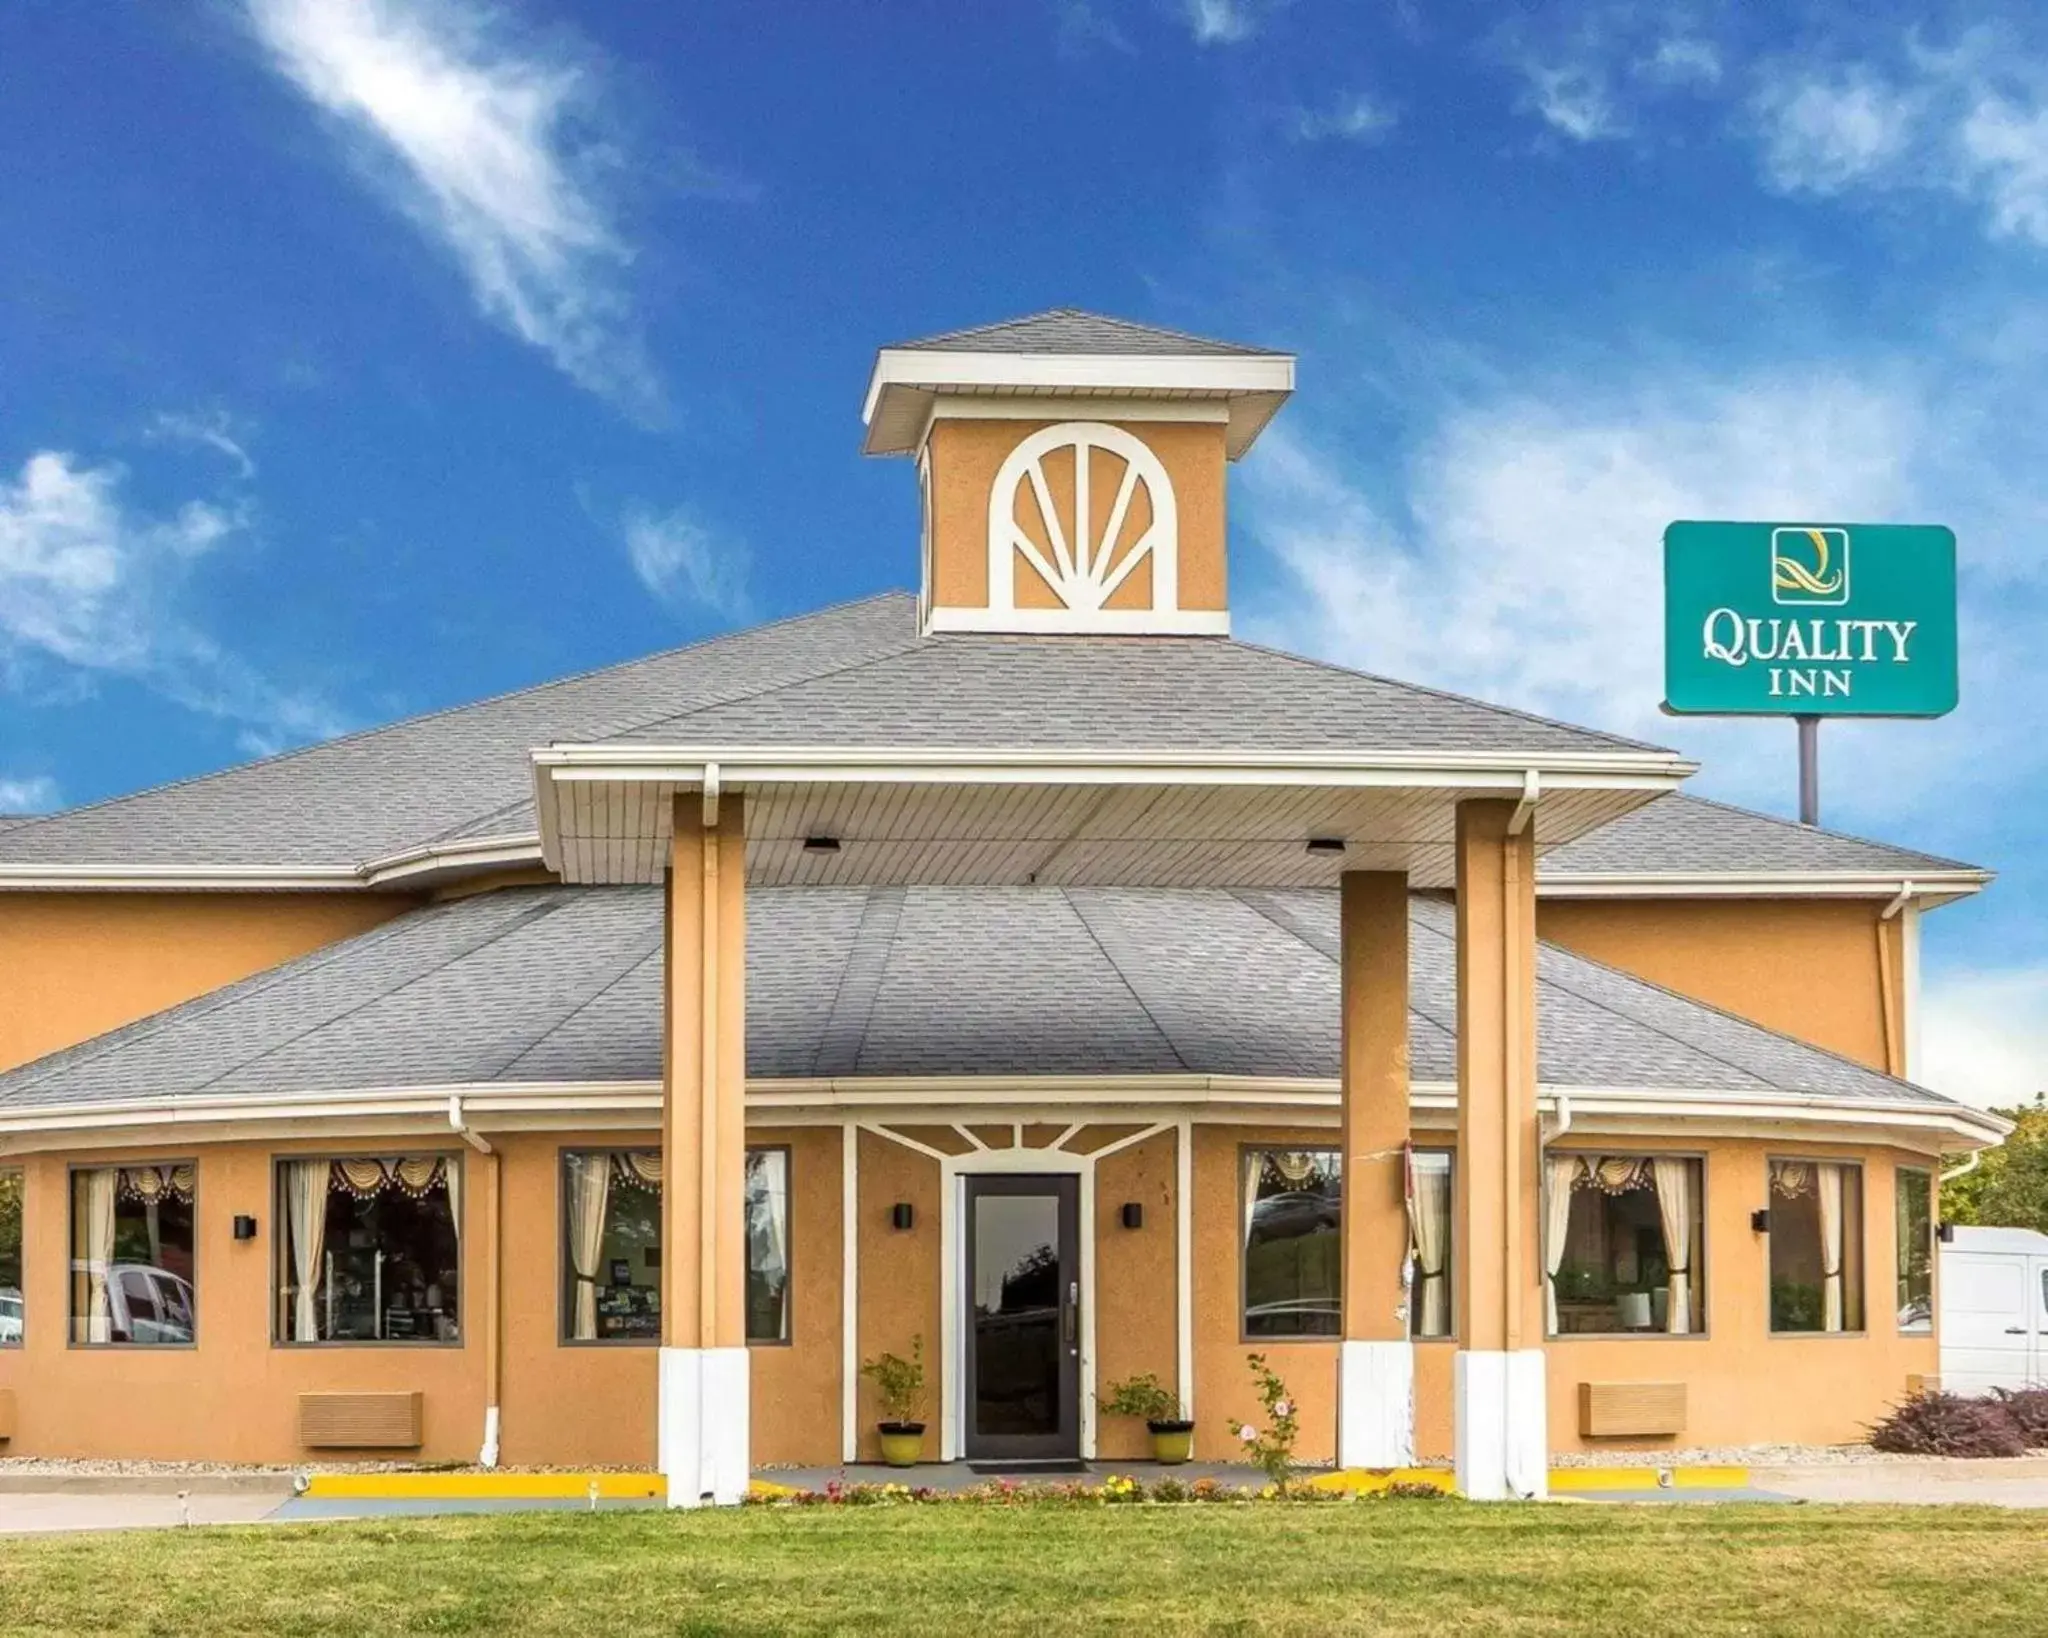 Property building in Quality Inn Morton at I-74